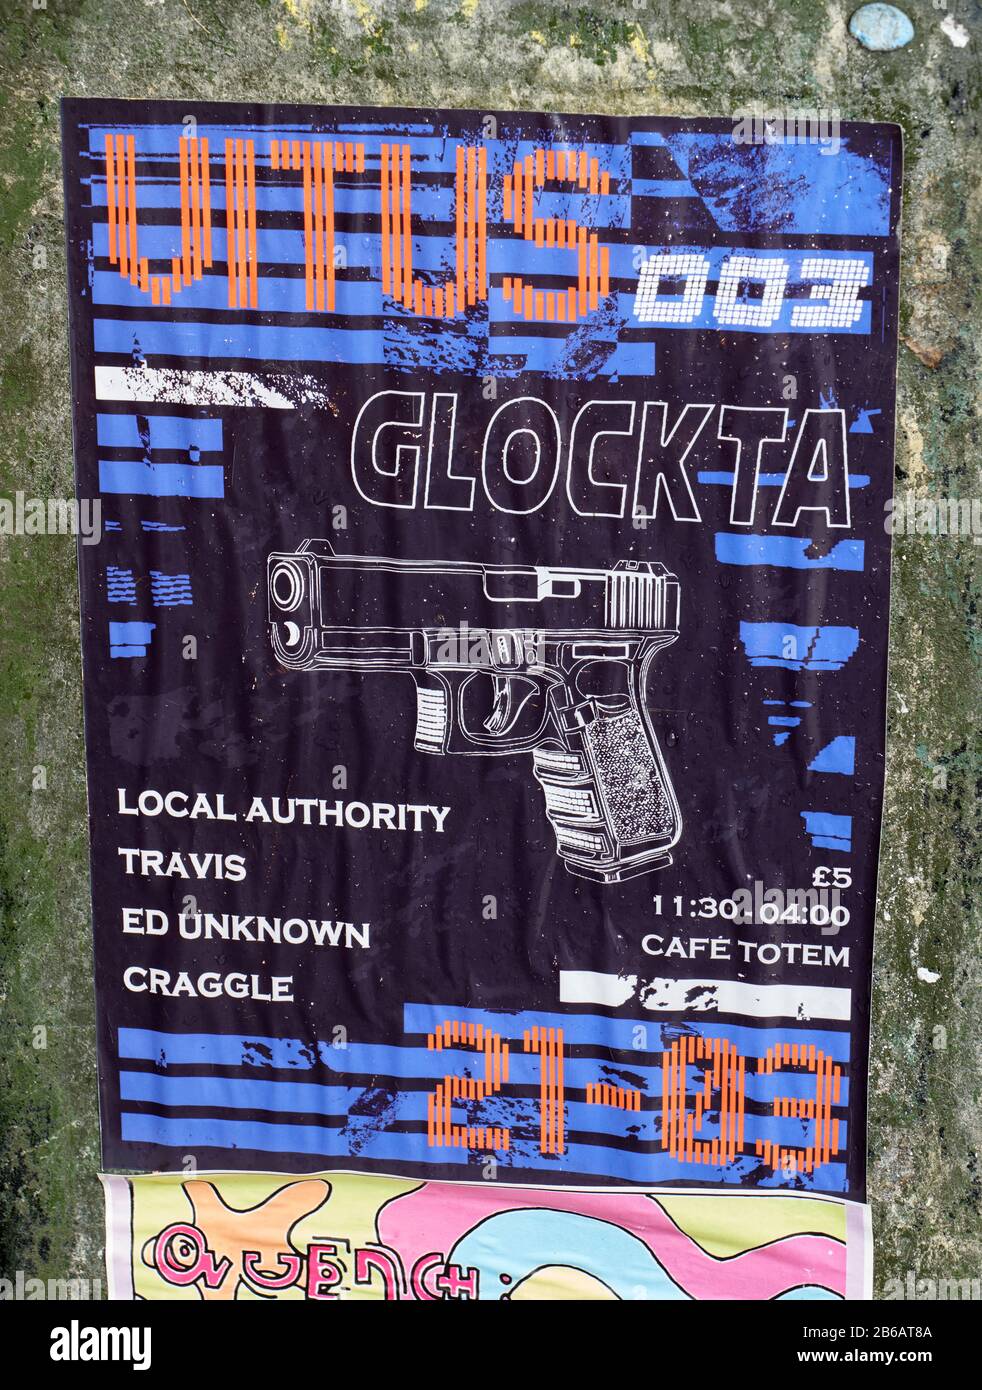 Image of Glock pistol used on poster to advertise Vitus 003 music event at Café Totem, Sheffield Stock Photo